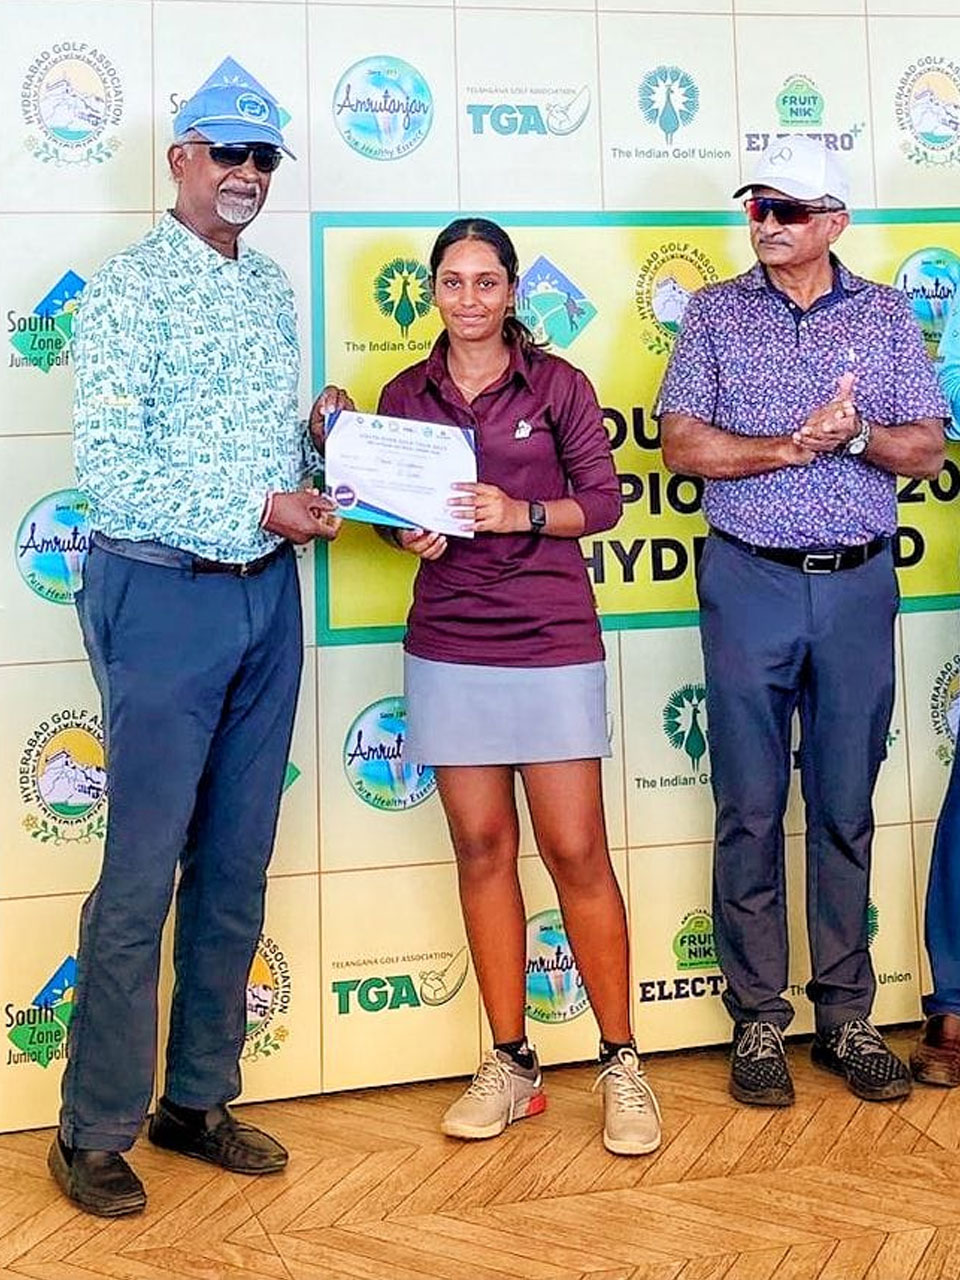 Manvi Singhania finished 2nd in Category B Girls at the HGA South Zone Junior Golf Championship